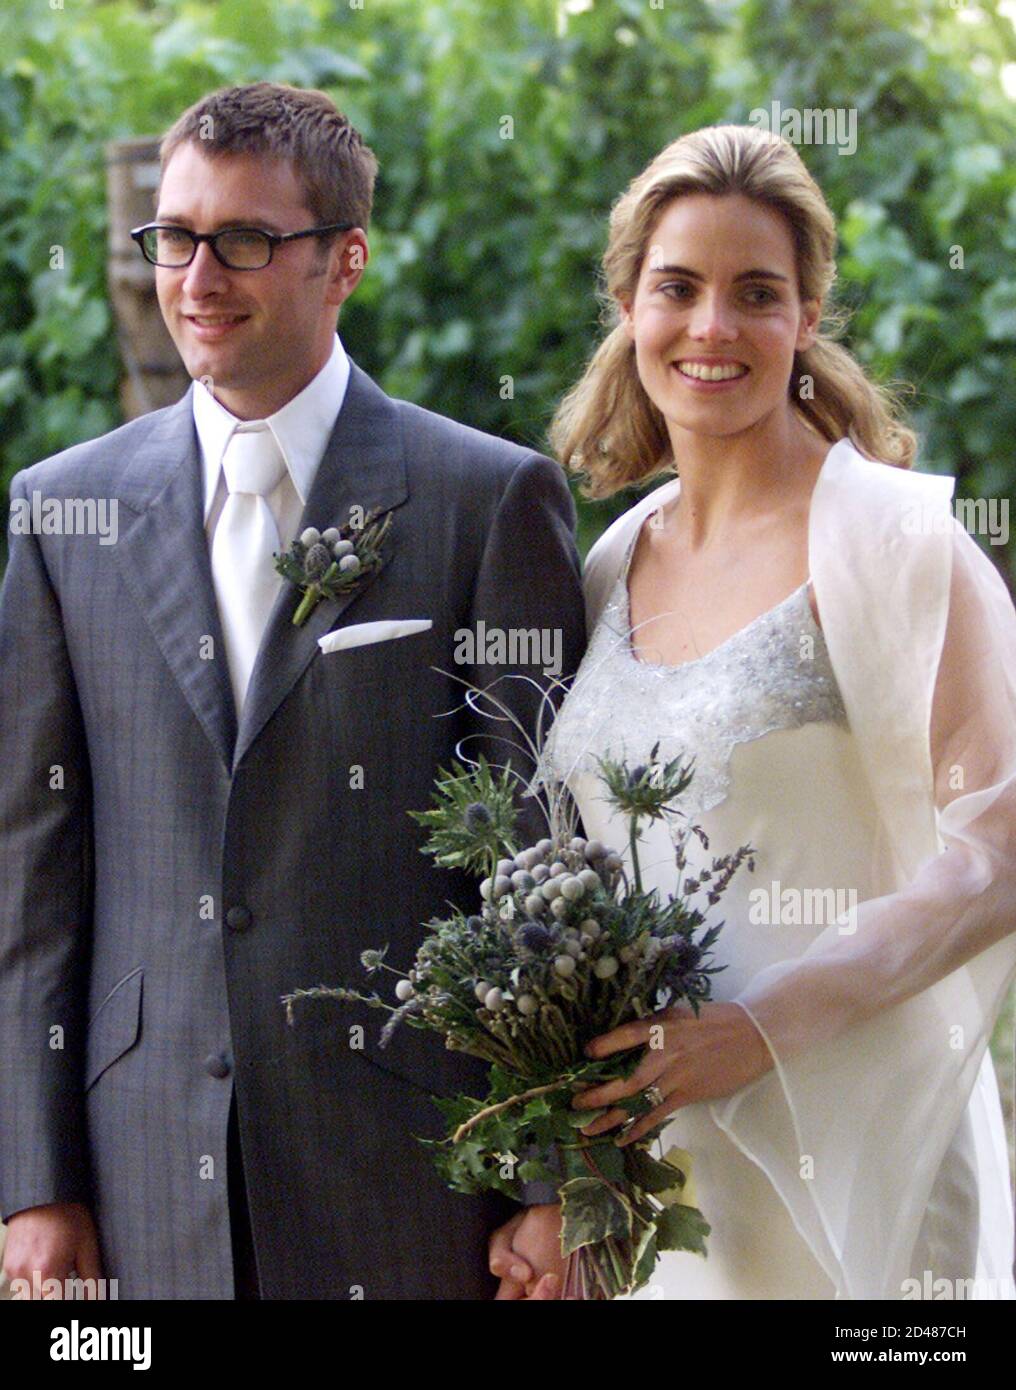 Mark Ferguson (L) and Fiona Stanley (R) celebrate their wedding at a  ceremony on the Lanzerac wine estate near Stellenbosch, November 18, 2000.  Mark is the son of Manchester United soccer manager